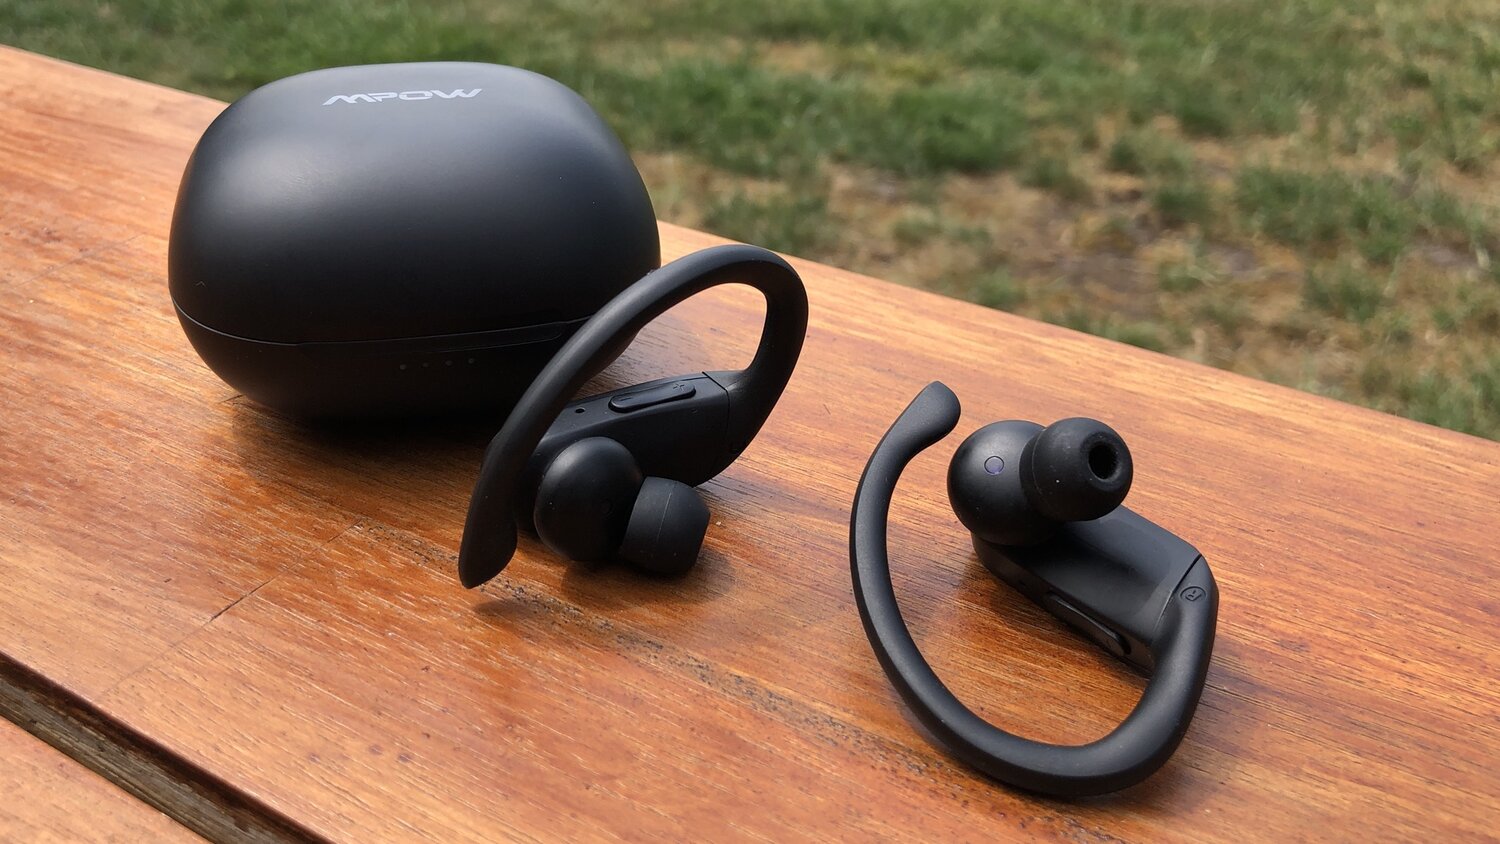 Pro review: Wireless sports earbuds great calls